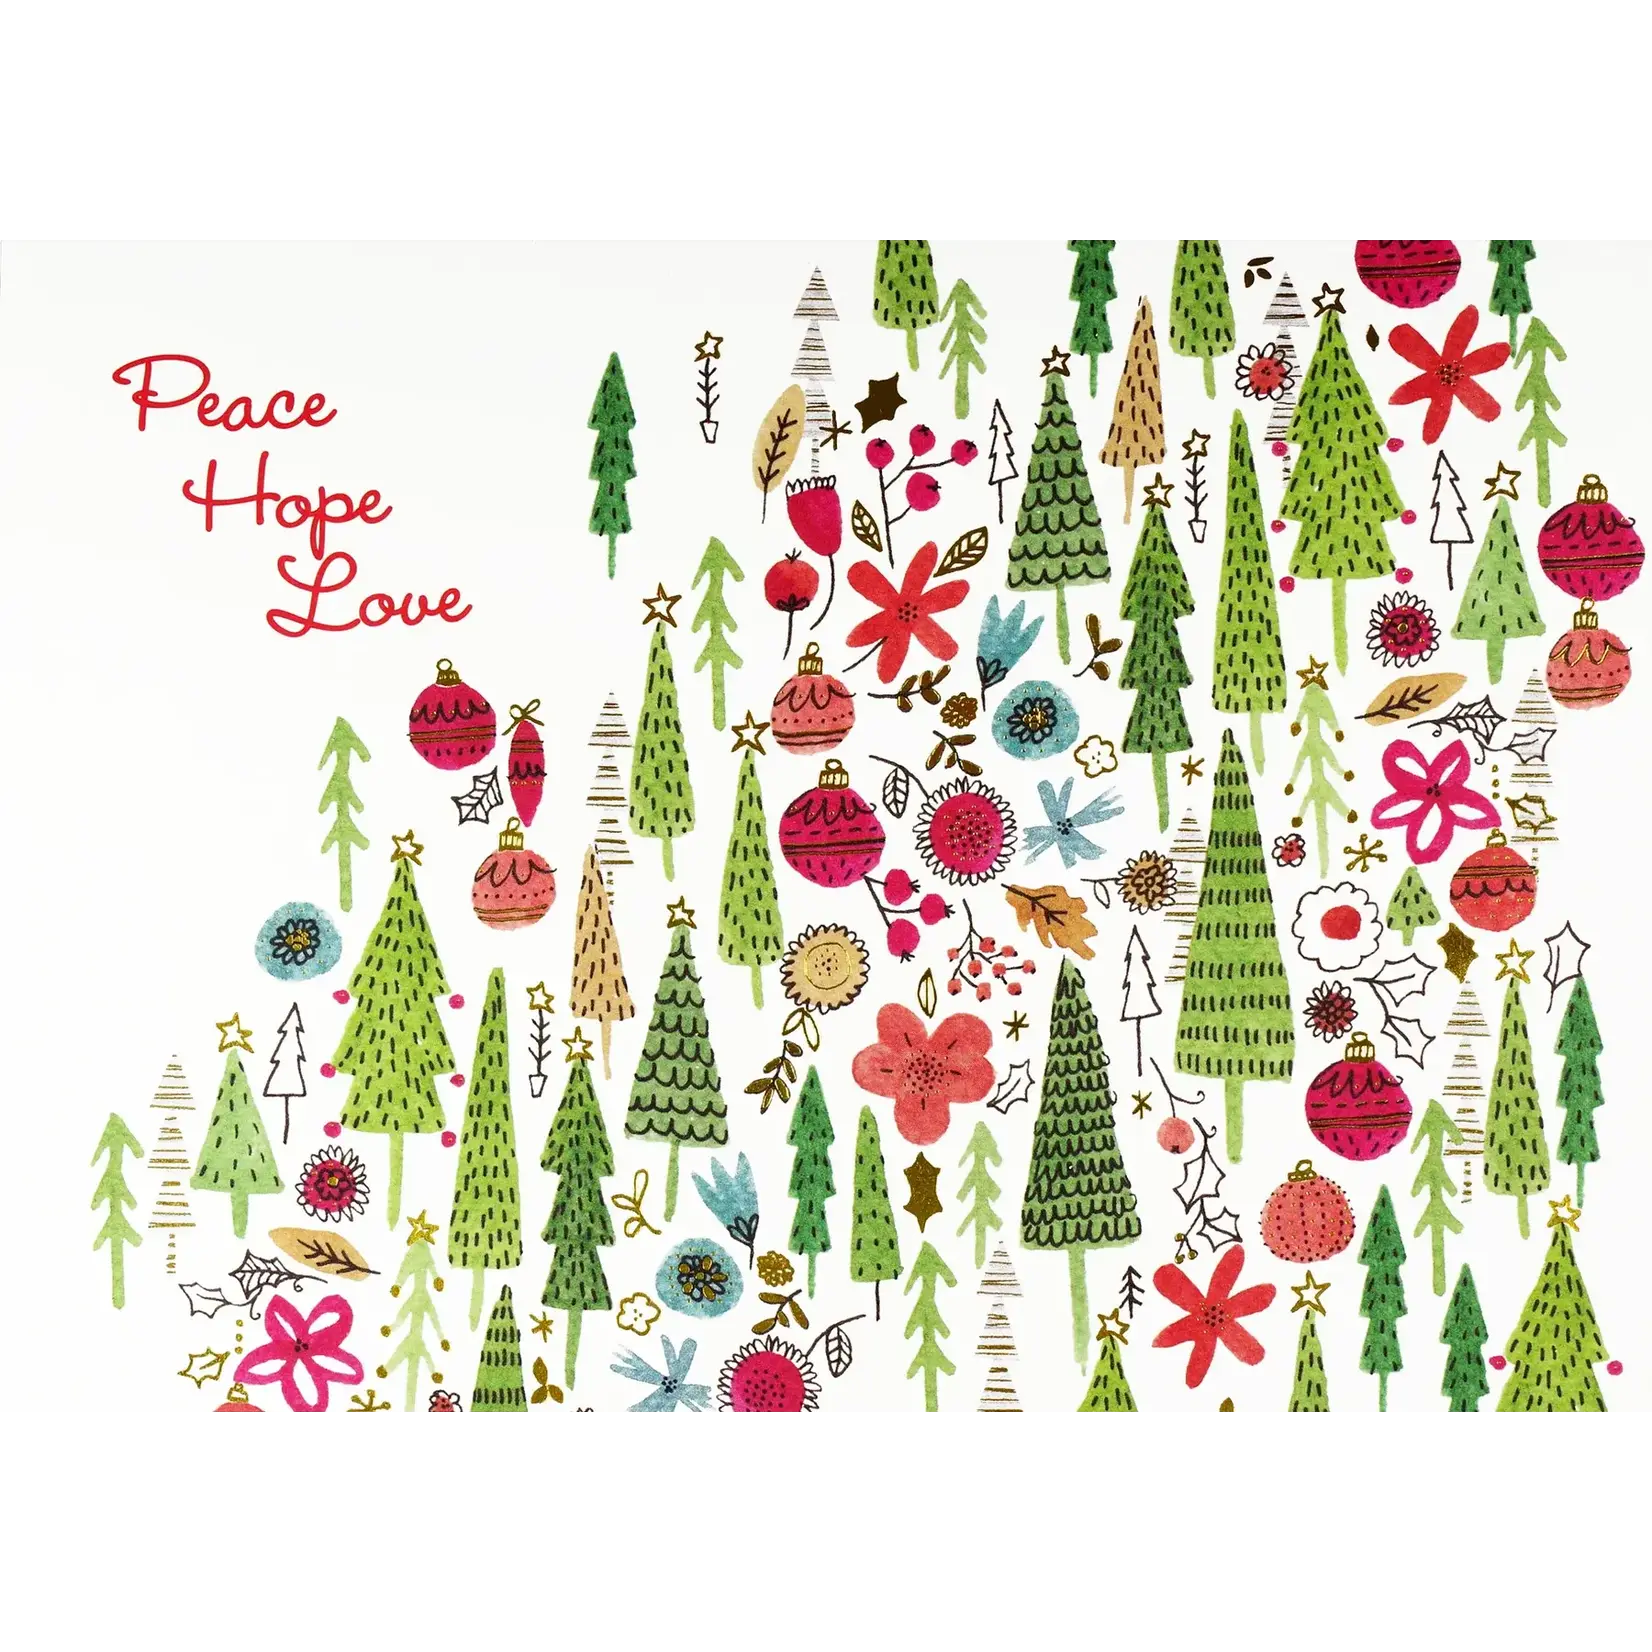 Peter Pauper Press Merry Medley Deluxe Boxed Holiday Cards